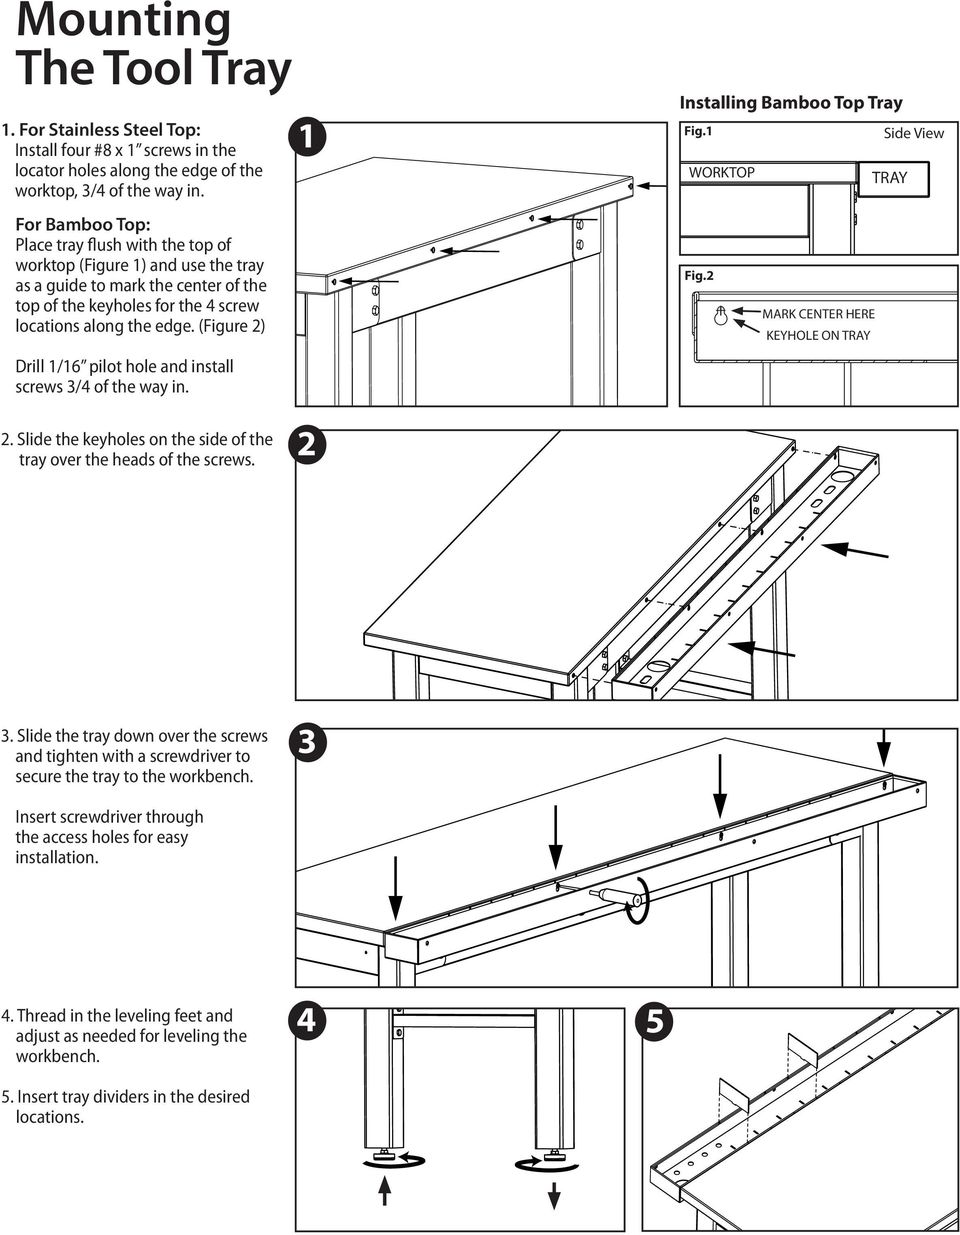 (Figure 2) Drill 1/16 pilot hole and install screws 3/4 of the way in. 1 Installing Bamboo Top Tray Fig.1 Side View WORKTOP TRAY Fig.2 + MARK CENTER HERE KEYHOLE ON TRAY 2.